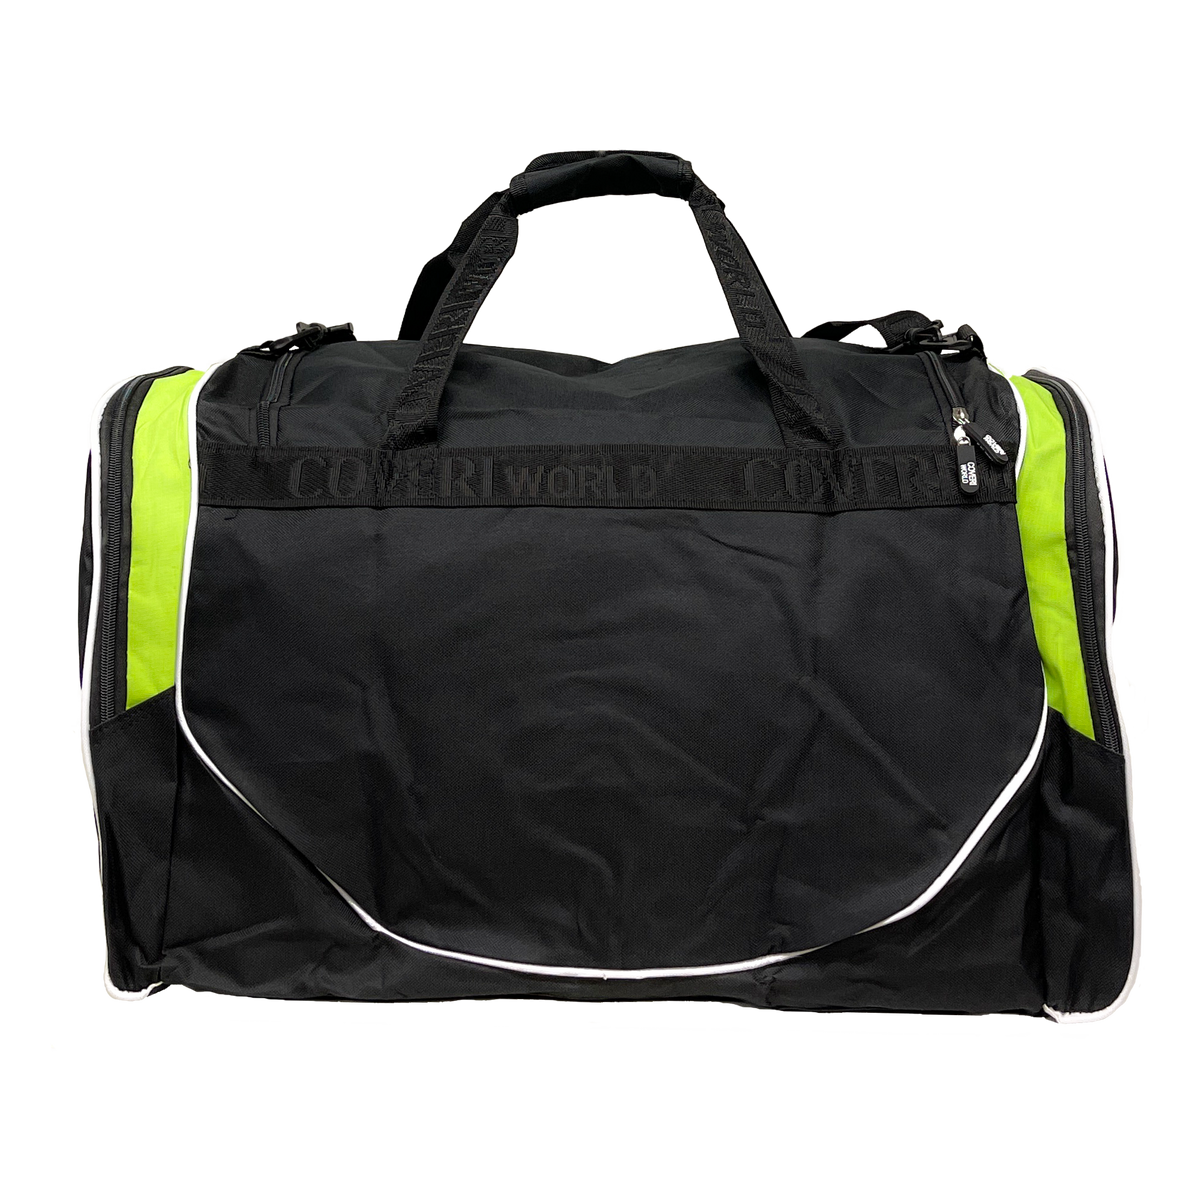 Coveri World - Multifunctional Sports Duffel Bag: Ideal for Sports and Travel